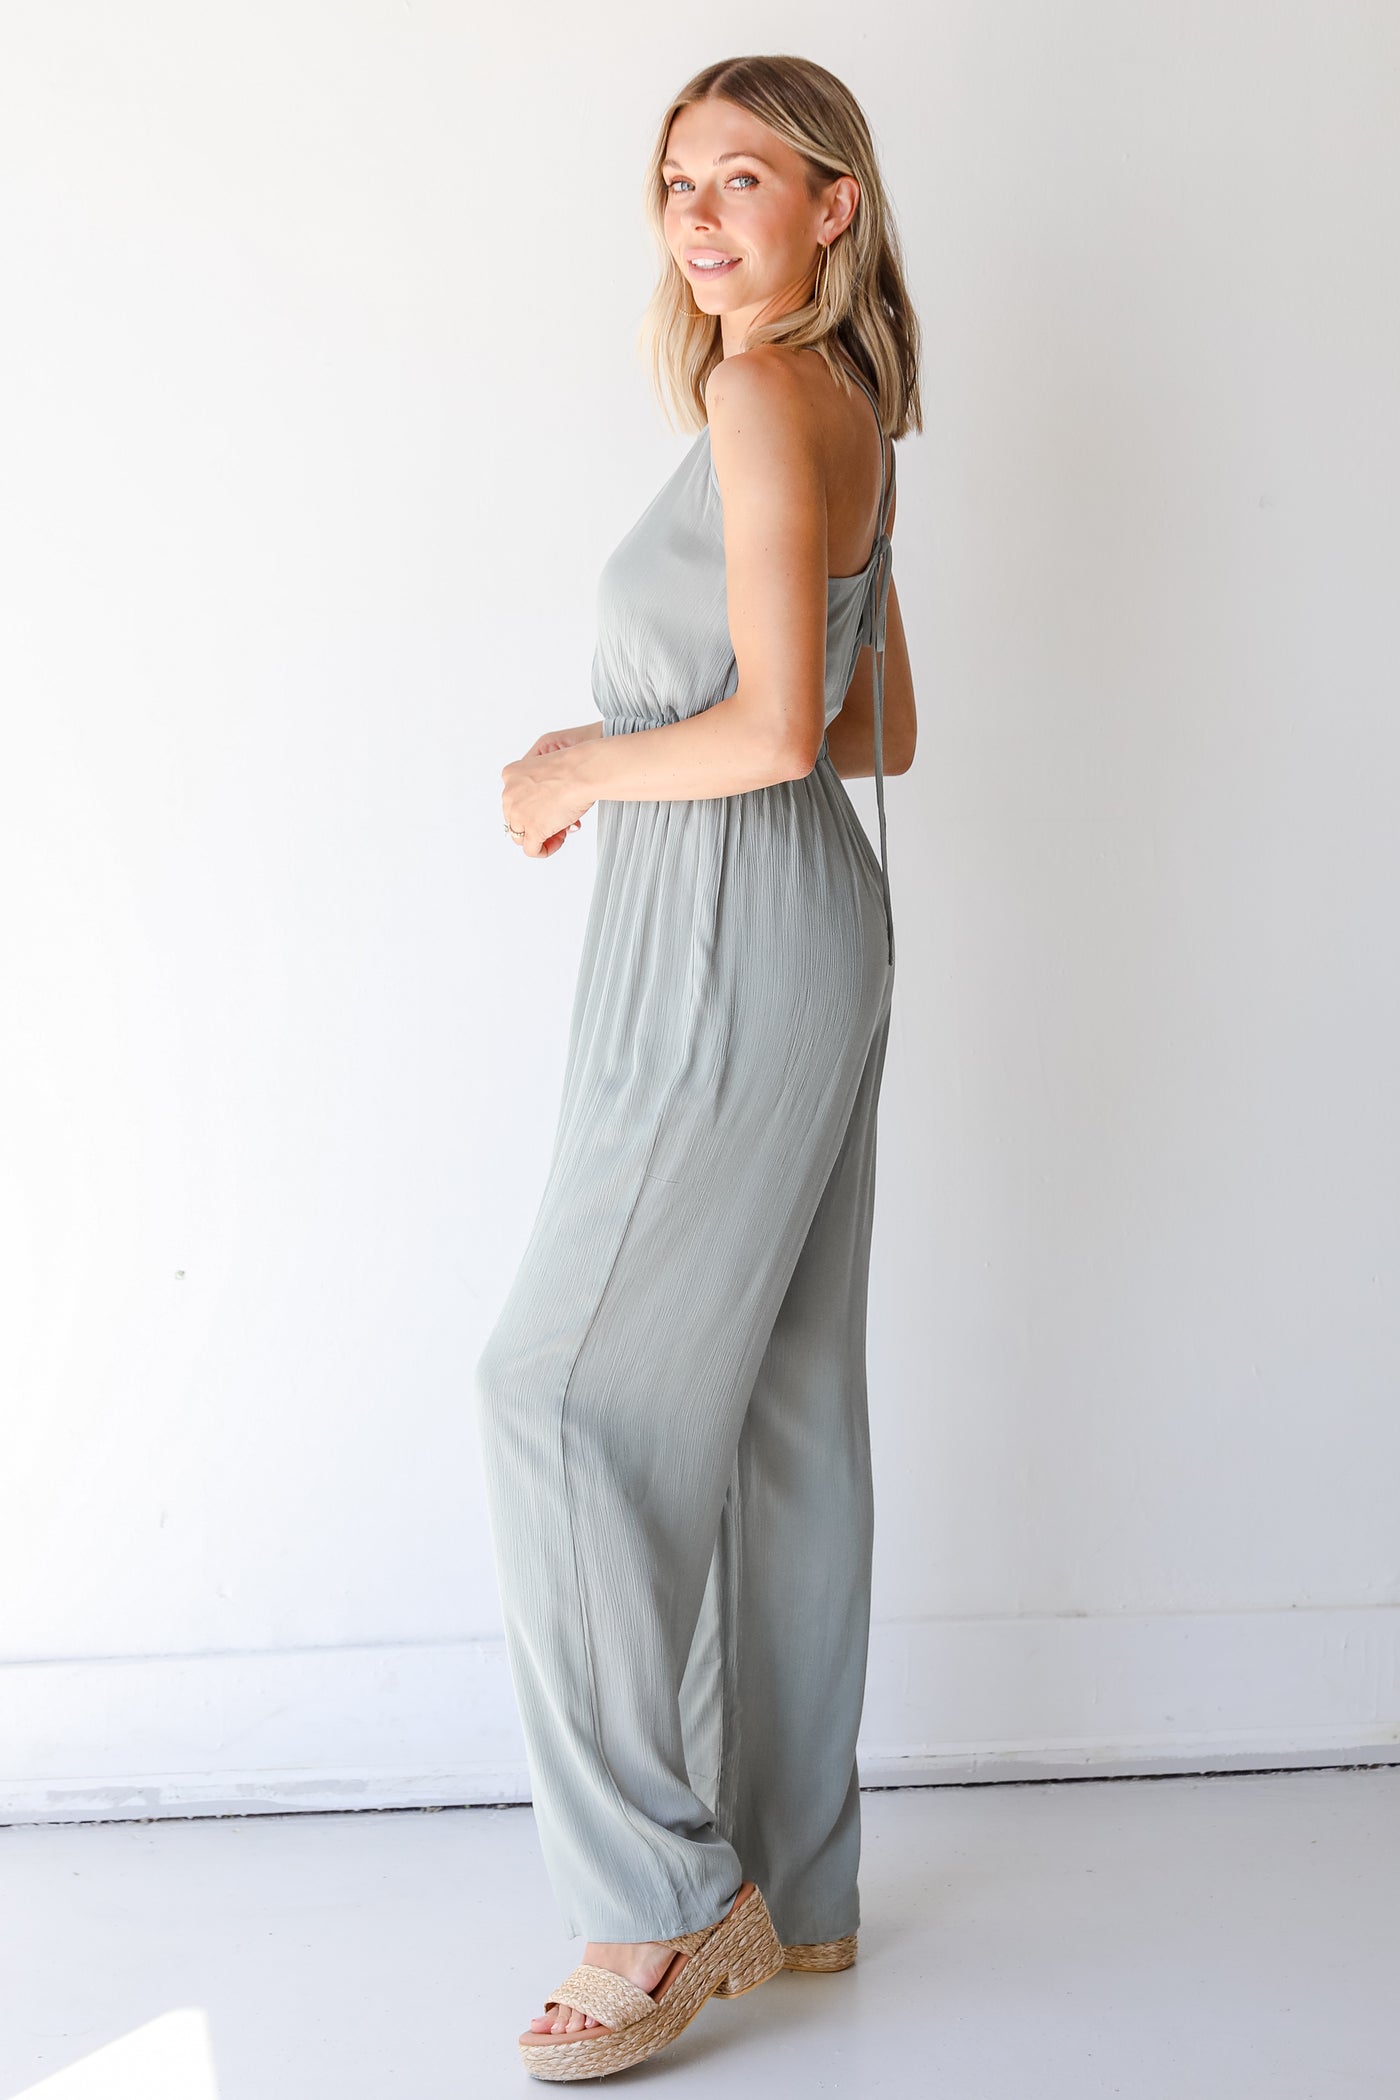 Jumpsuit in sage side view